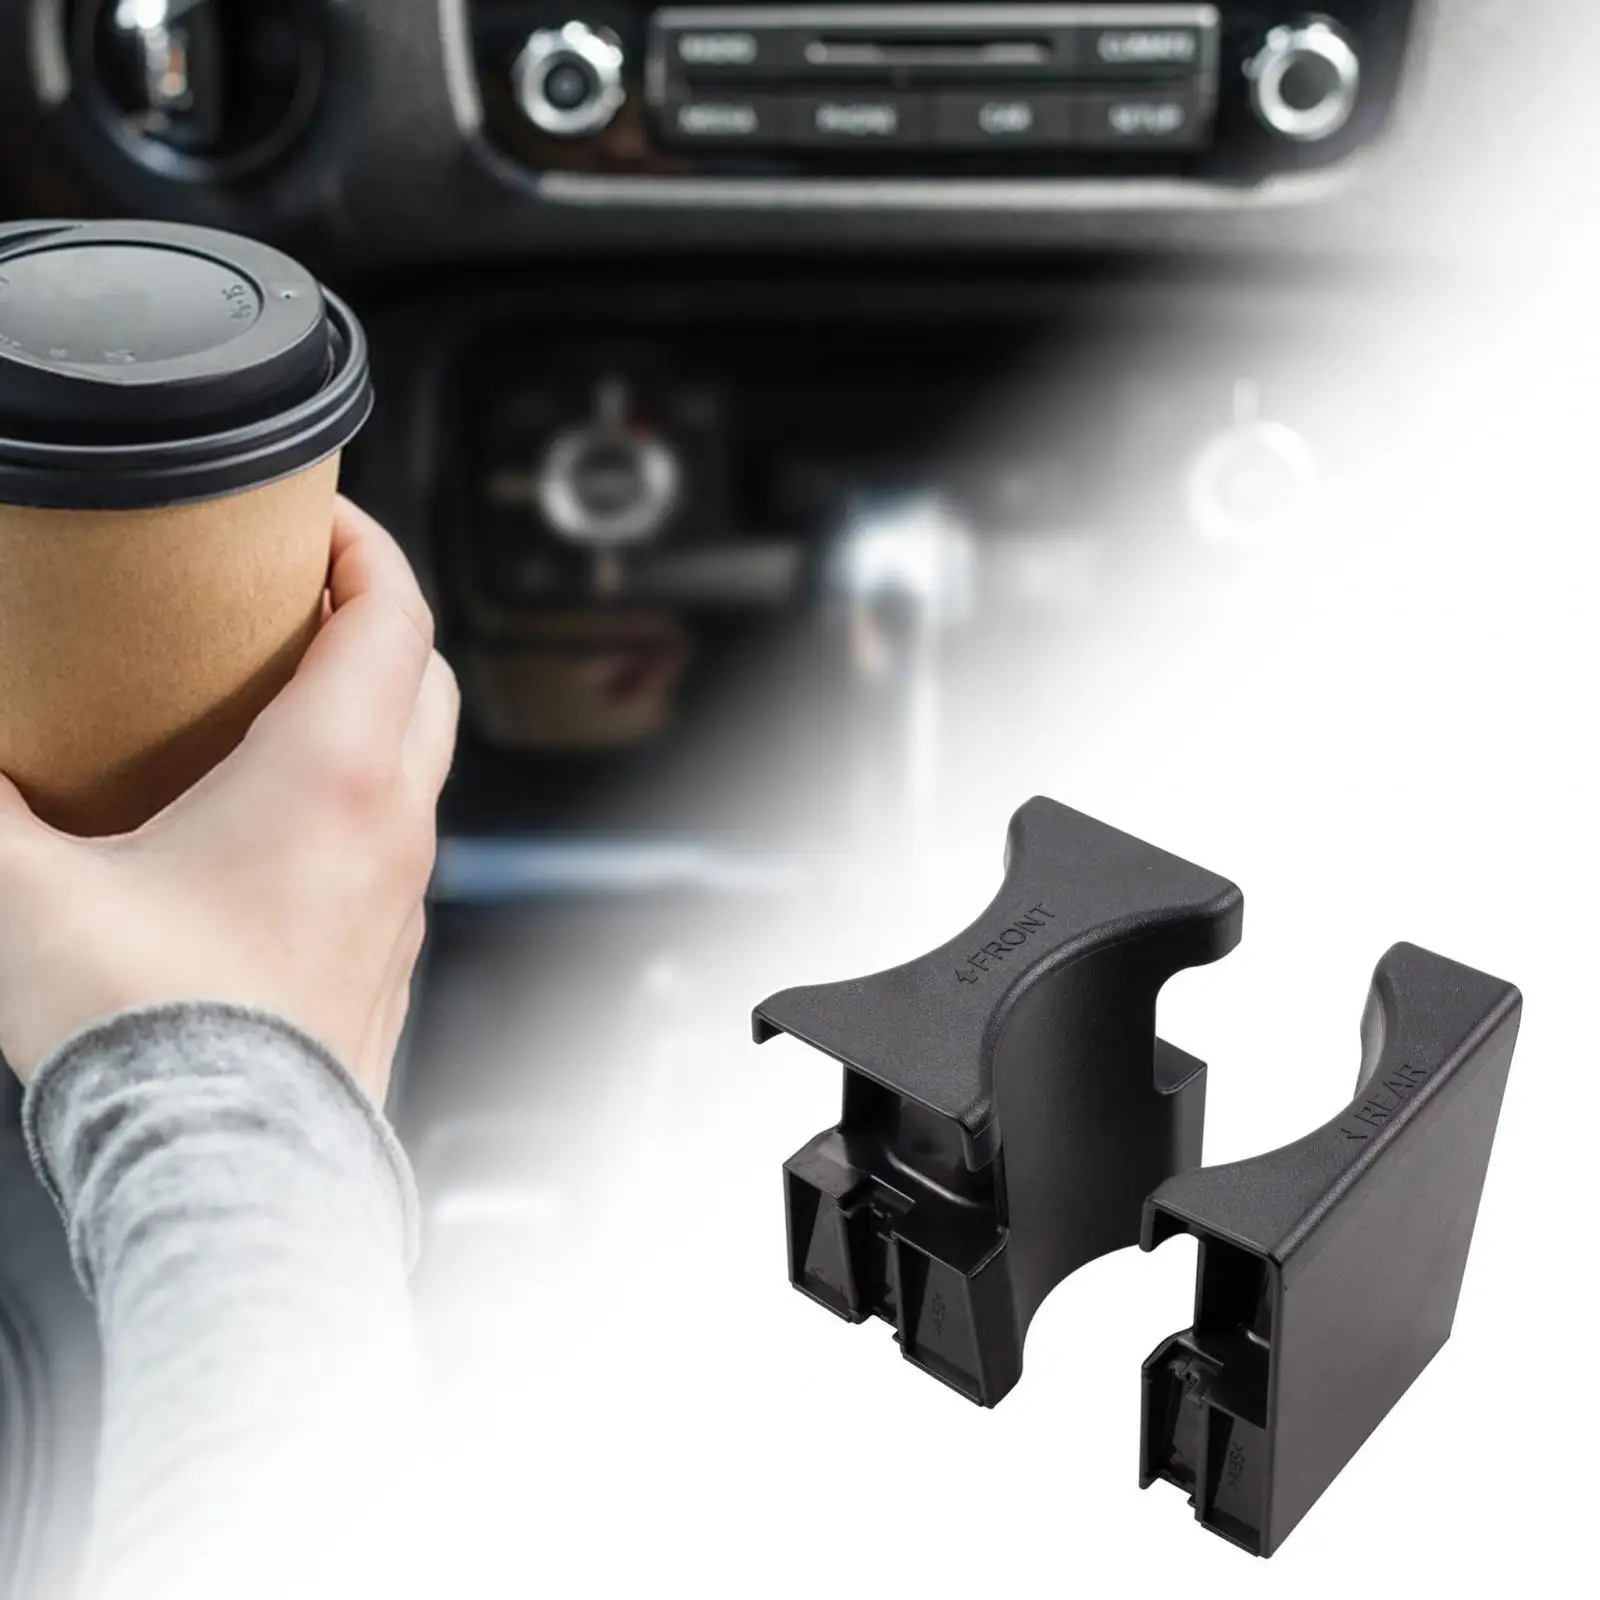 Car Center Console Cup Holder Insert 77292-t0a-a01ZA Easy to Install Cup Limiter Replacement Parts for Honda Cr-v 2015-2016